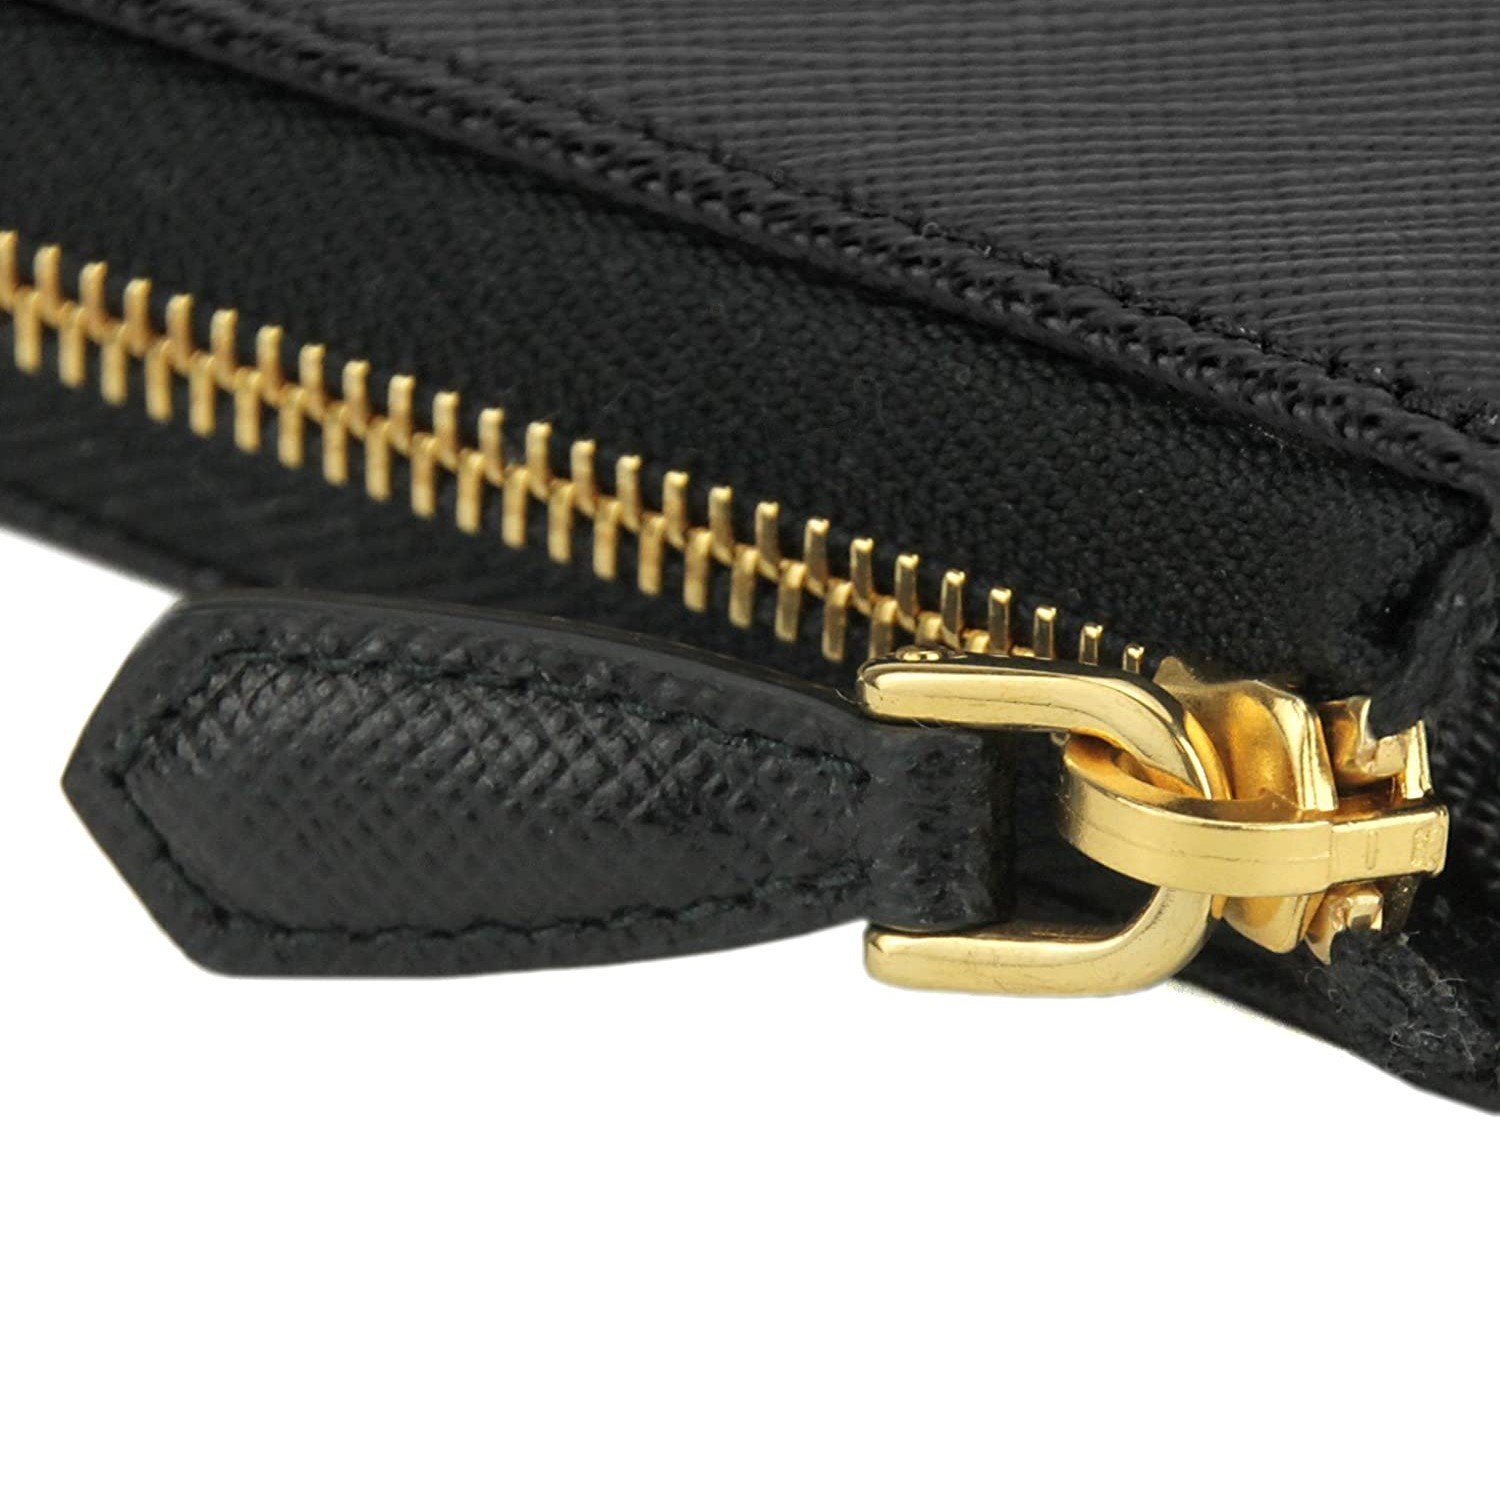 Prada Black Saffiano Leather Key Holder Pouch Wallet 1PP026 at_Queen_Bee_of_Beverly_Hills